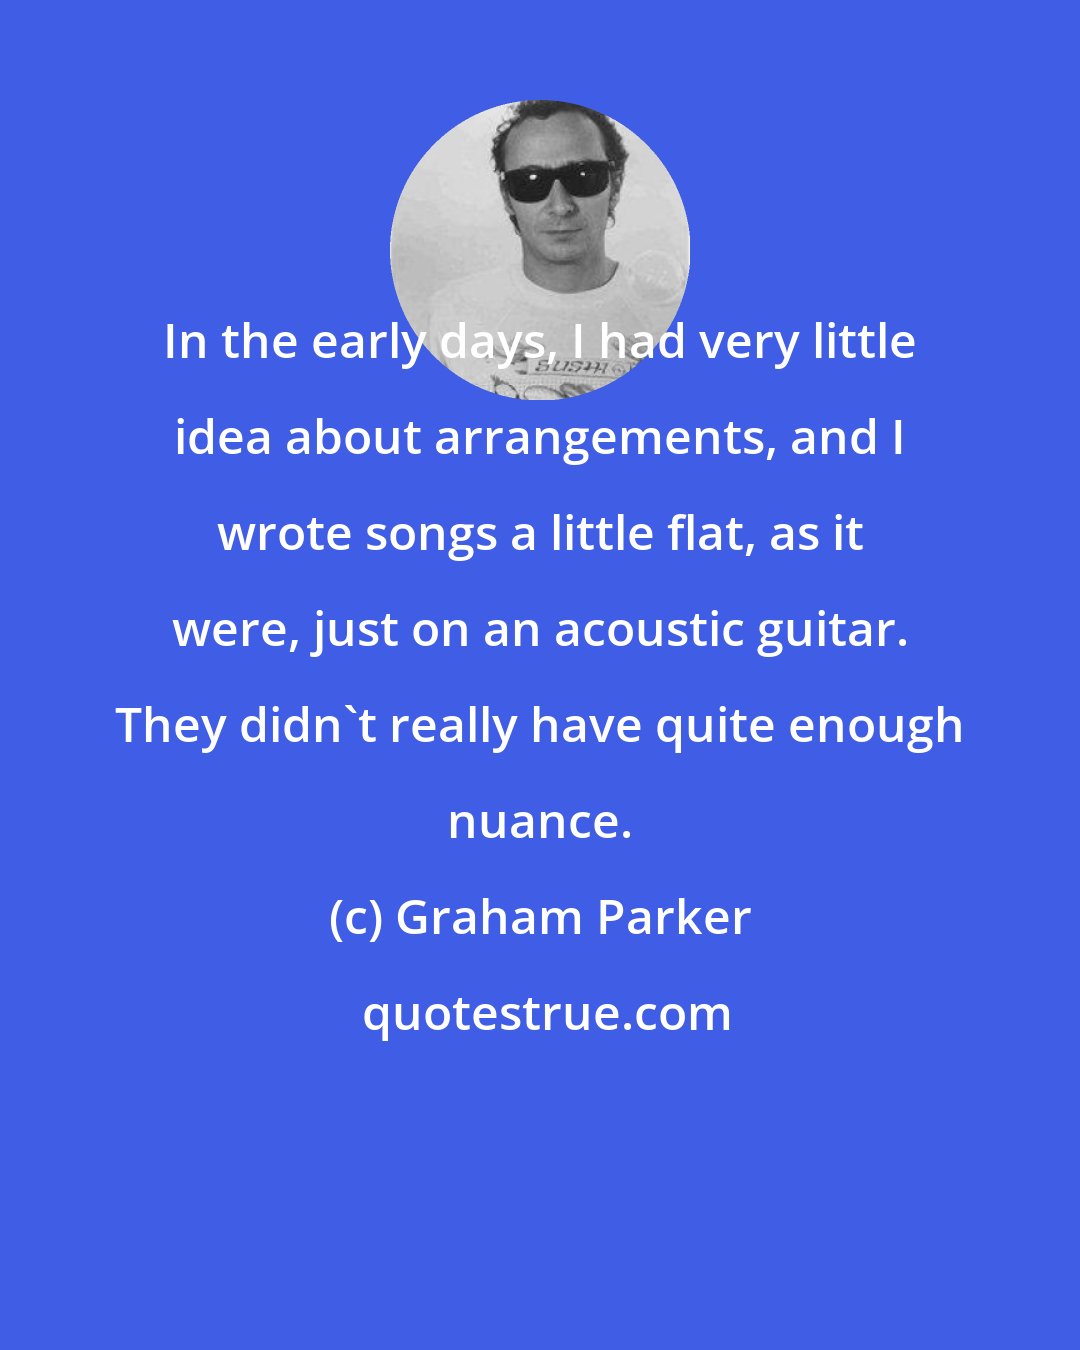 Graham Parker: In the early days, I had very little idea about arrangements, and I wrote songs a little flat, as it were, just on an acoustic guitar. They didn't really have quite enough nuance.